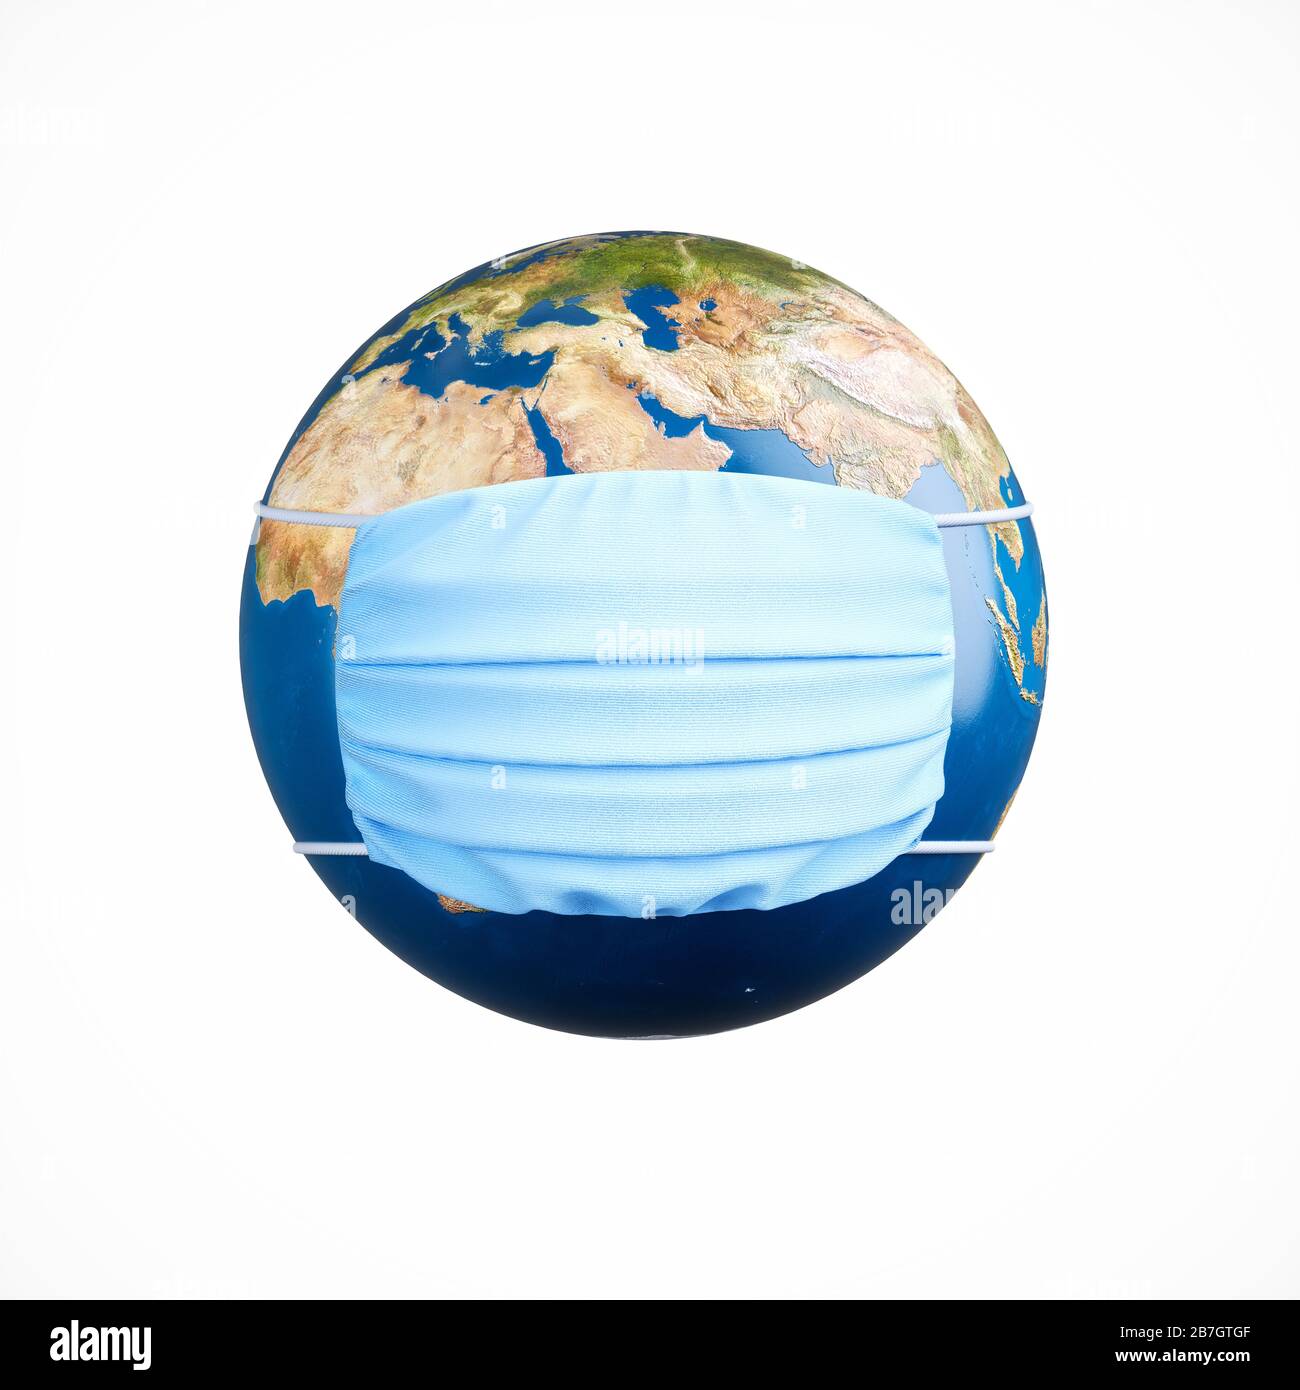 Earth globe wearing a protective blue mask. Coronavirus, COVID-19 concept. 3d rendering illustration isolated Stock Photo